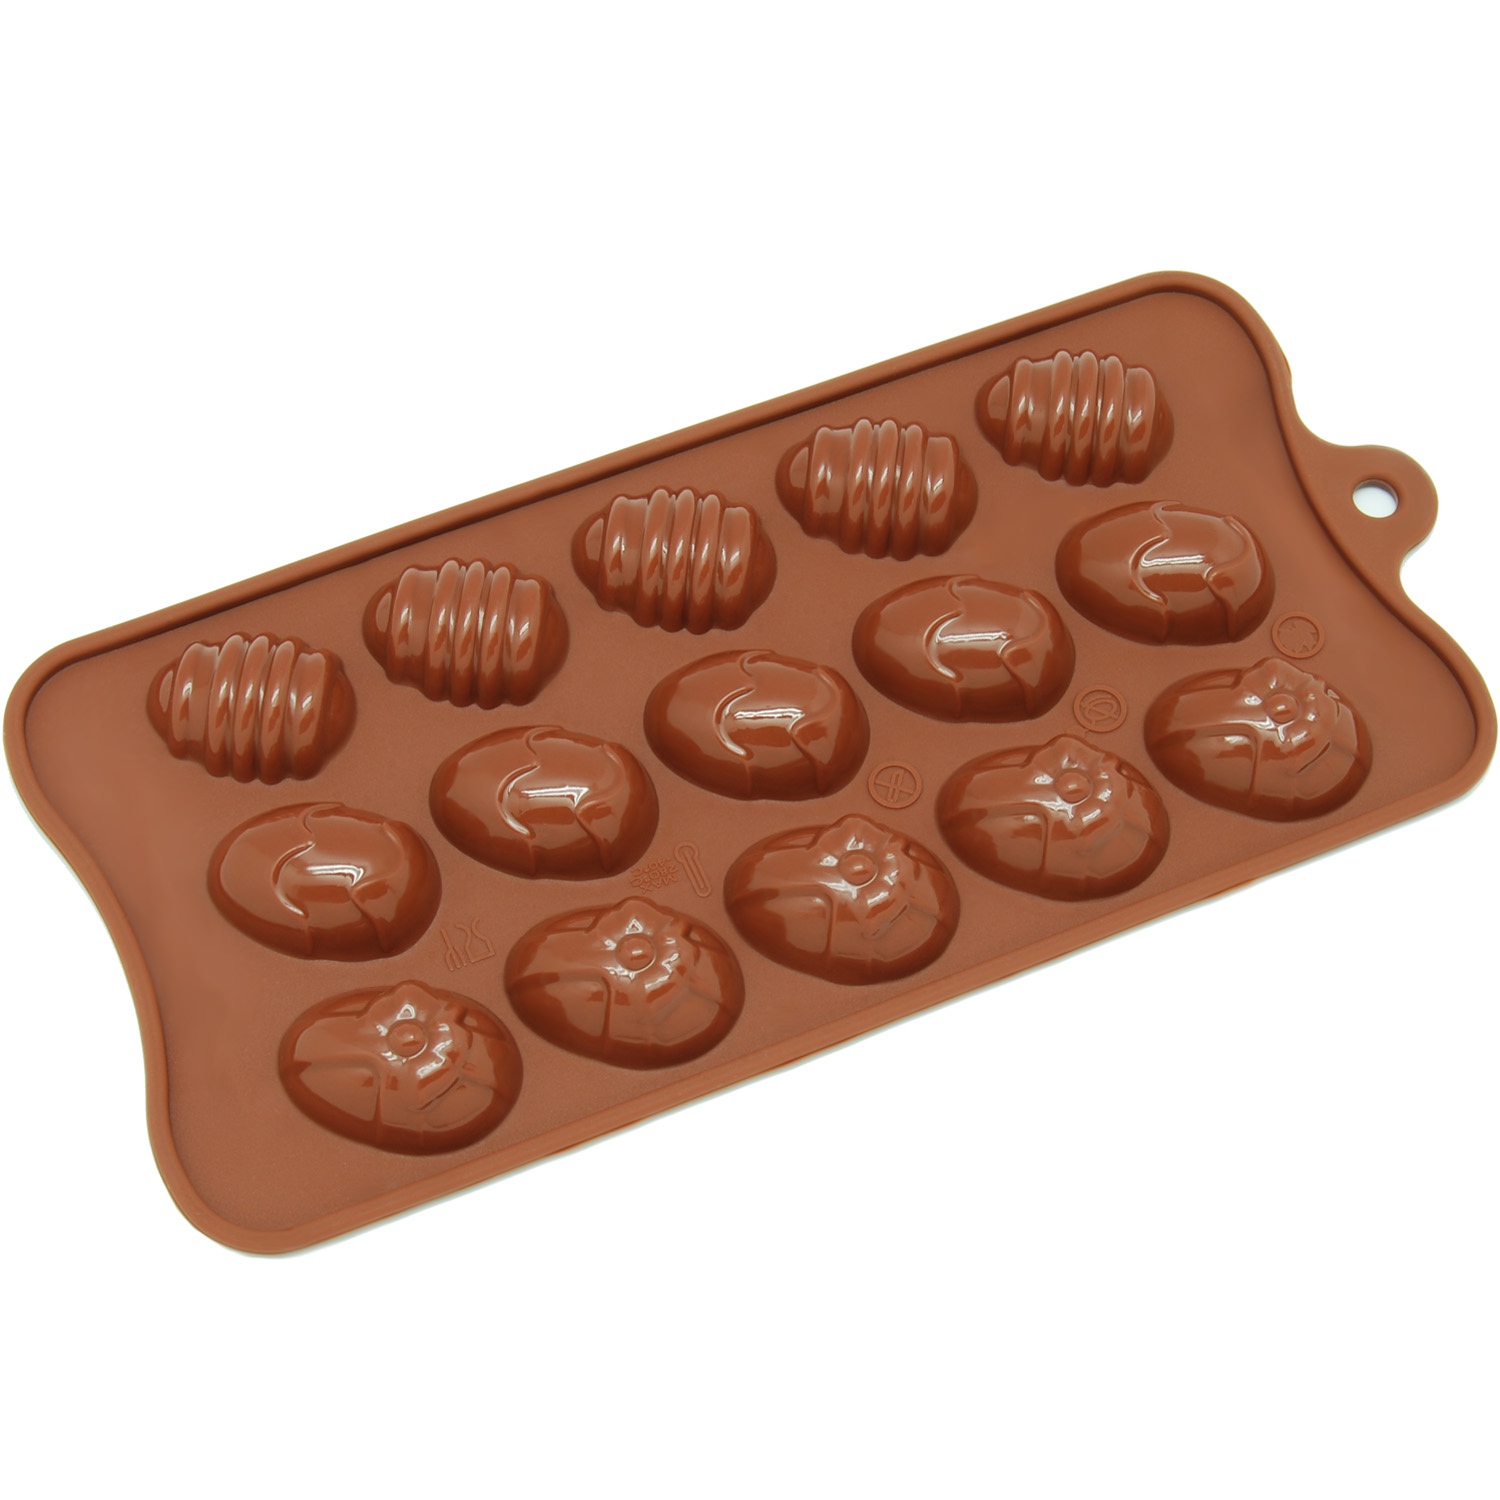 Freshware Silicone Mold, Chocolate Mold, Candy Mold, Ice Mold, Soap Mold for Chocolate, Candy and Gummy, Easter Egg, 15-Cavity